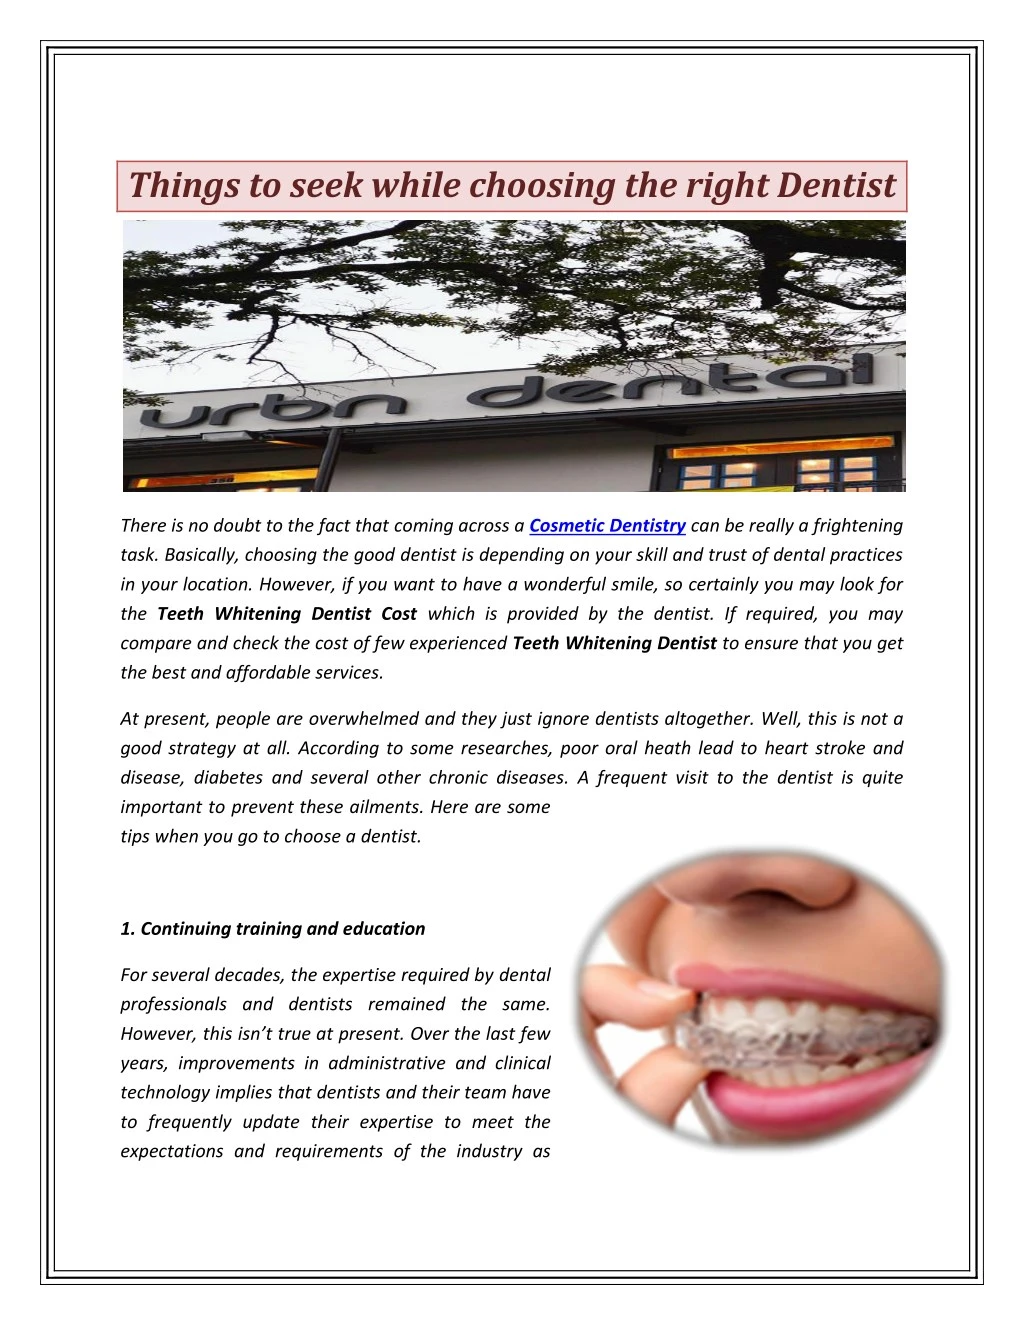 things to seek while choosing the right dentist